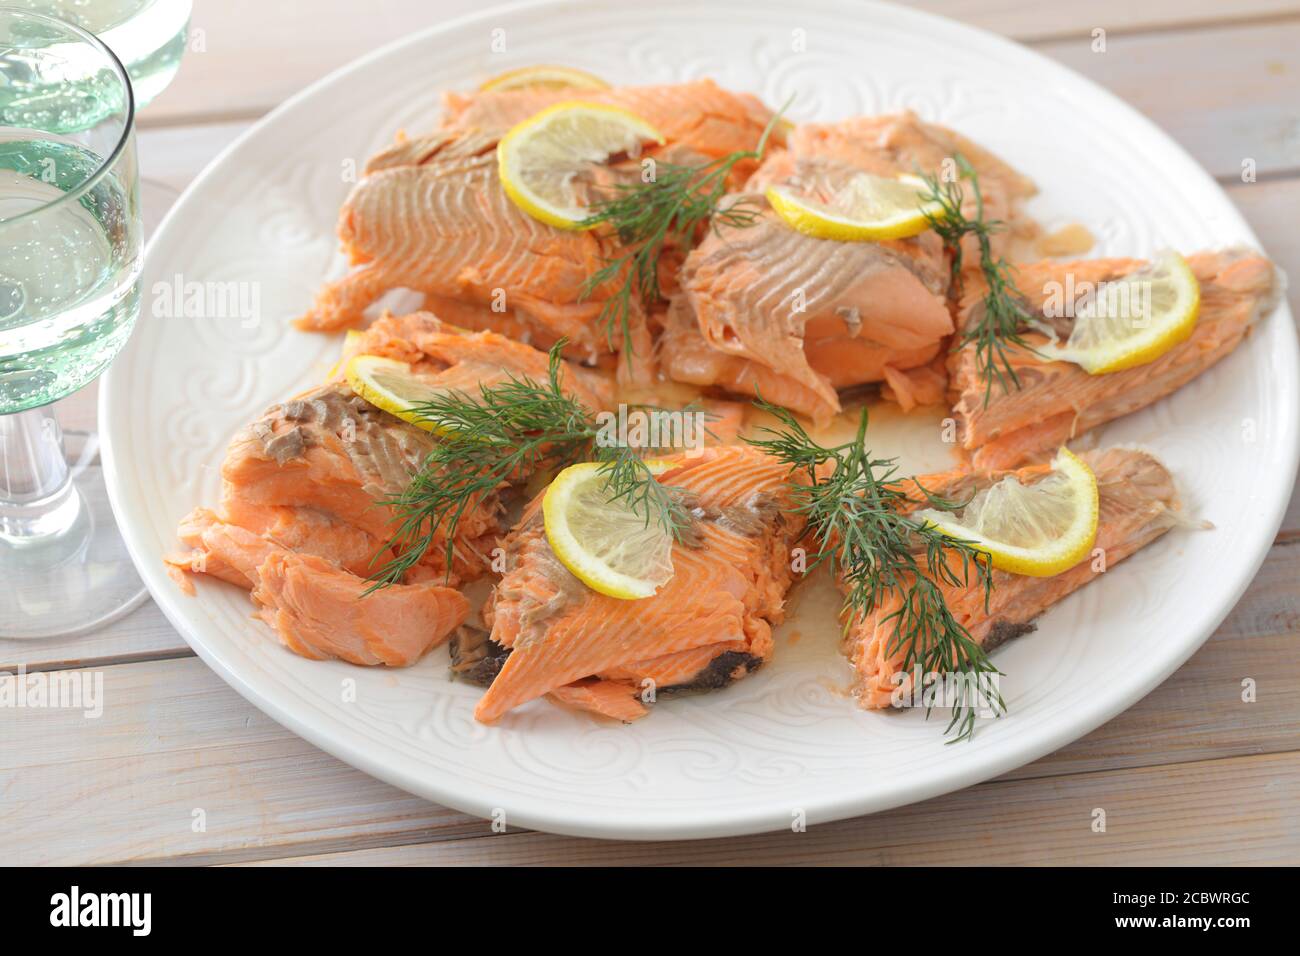 Baked trout fish served with slices of lemon and dill Stock Photo